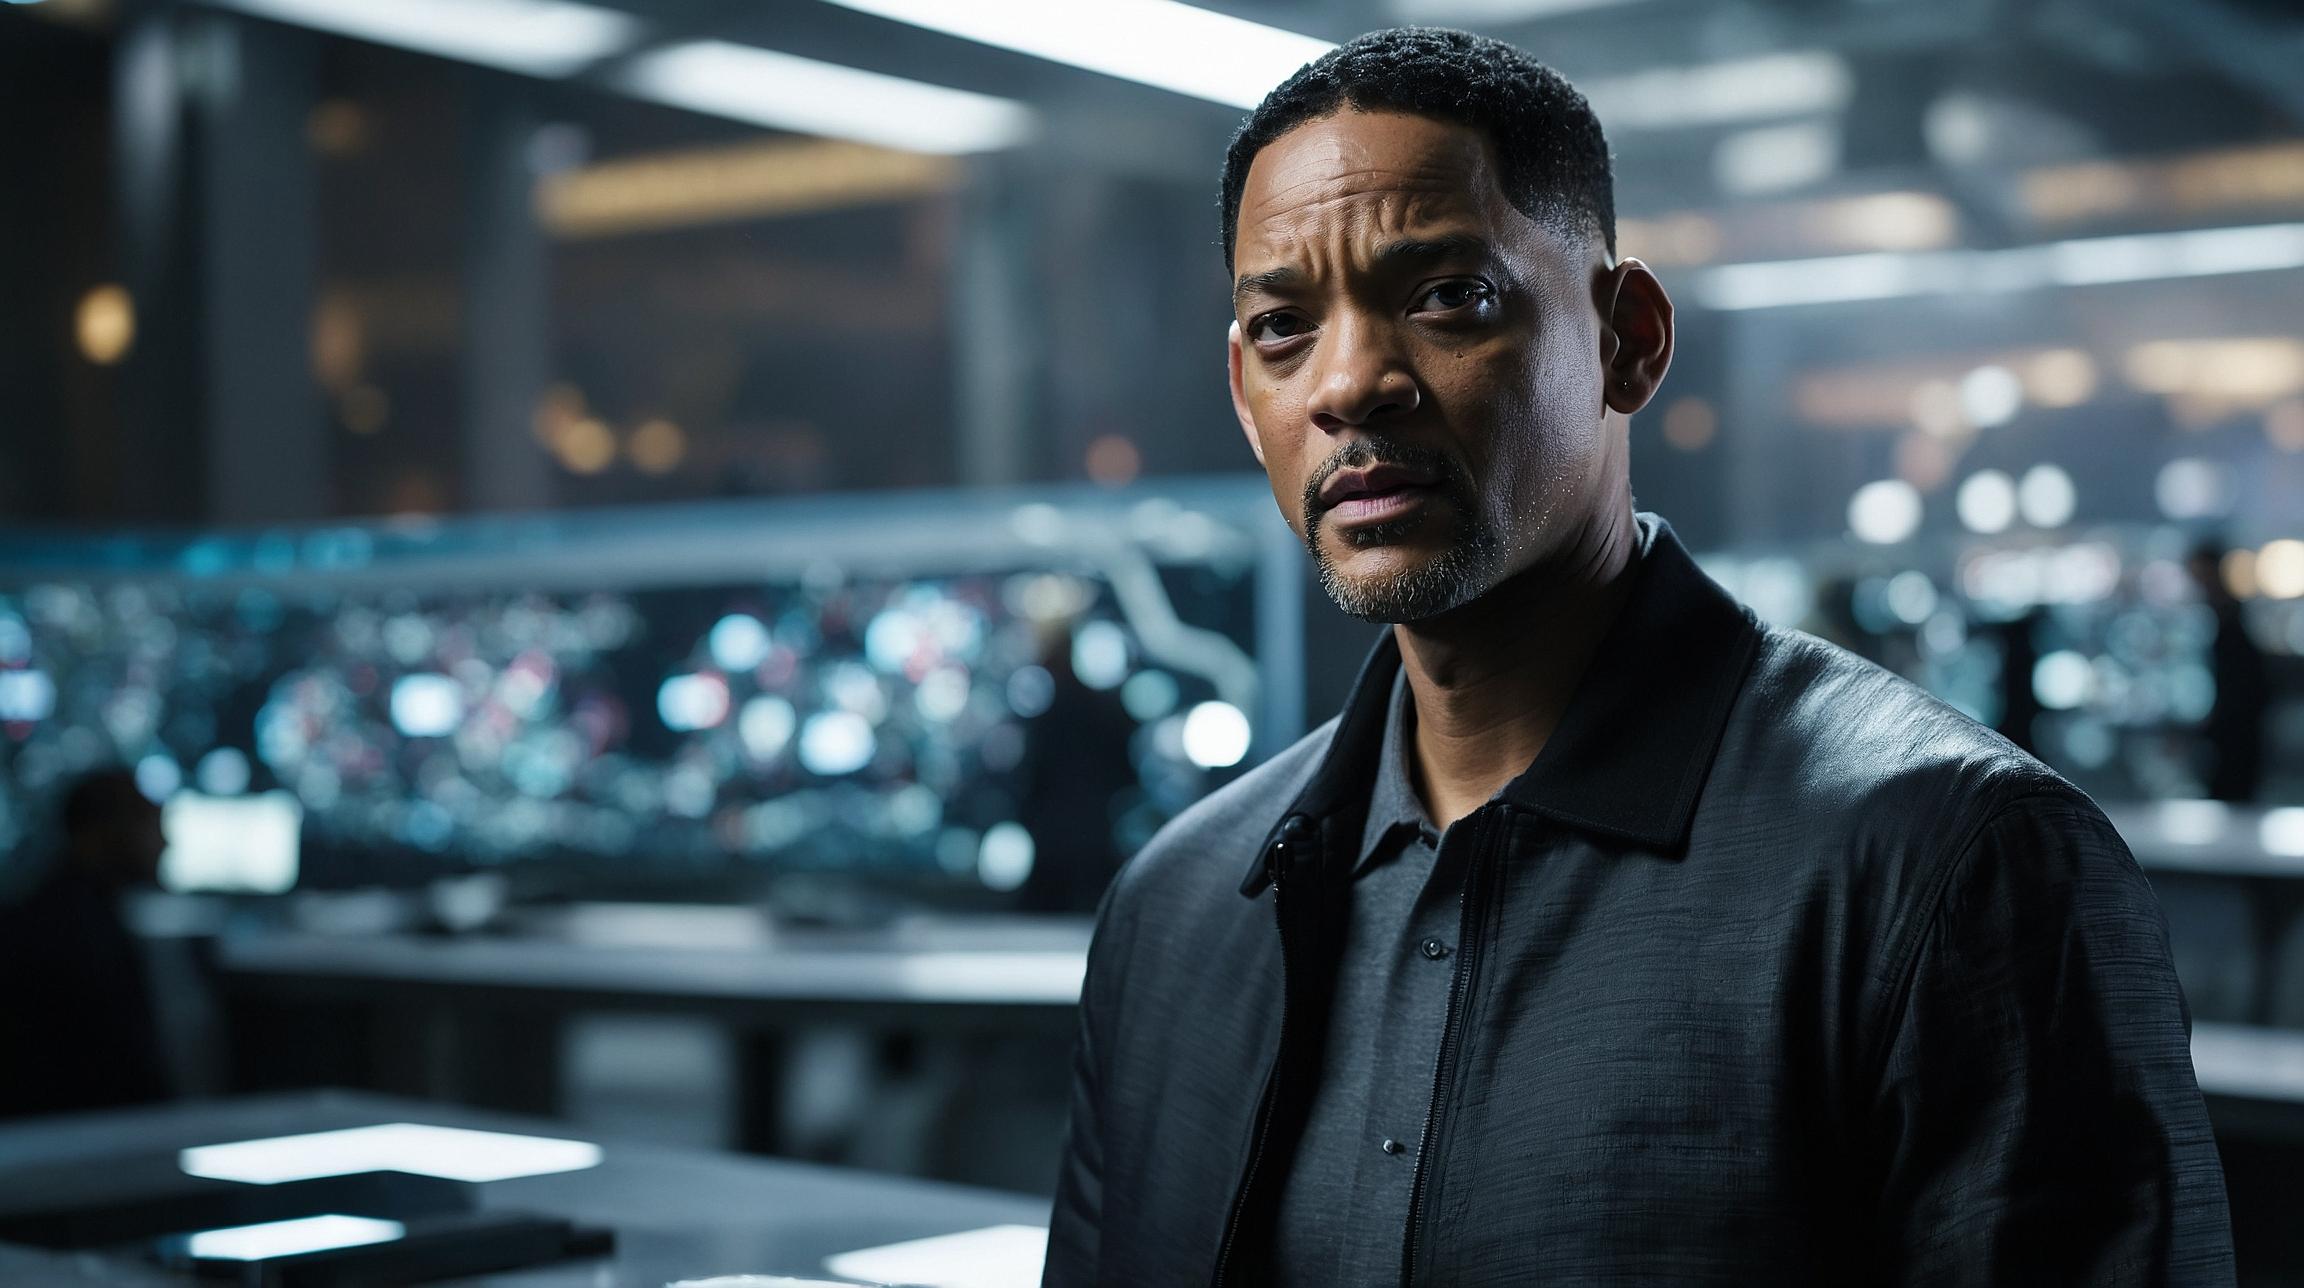 Will Smith Explores Tech Secrets in New Film 'Resistor' | FinOracle